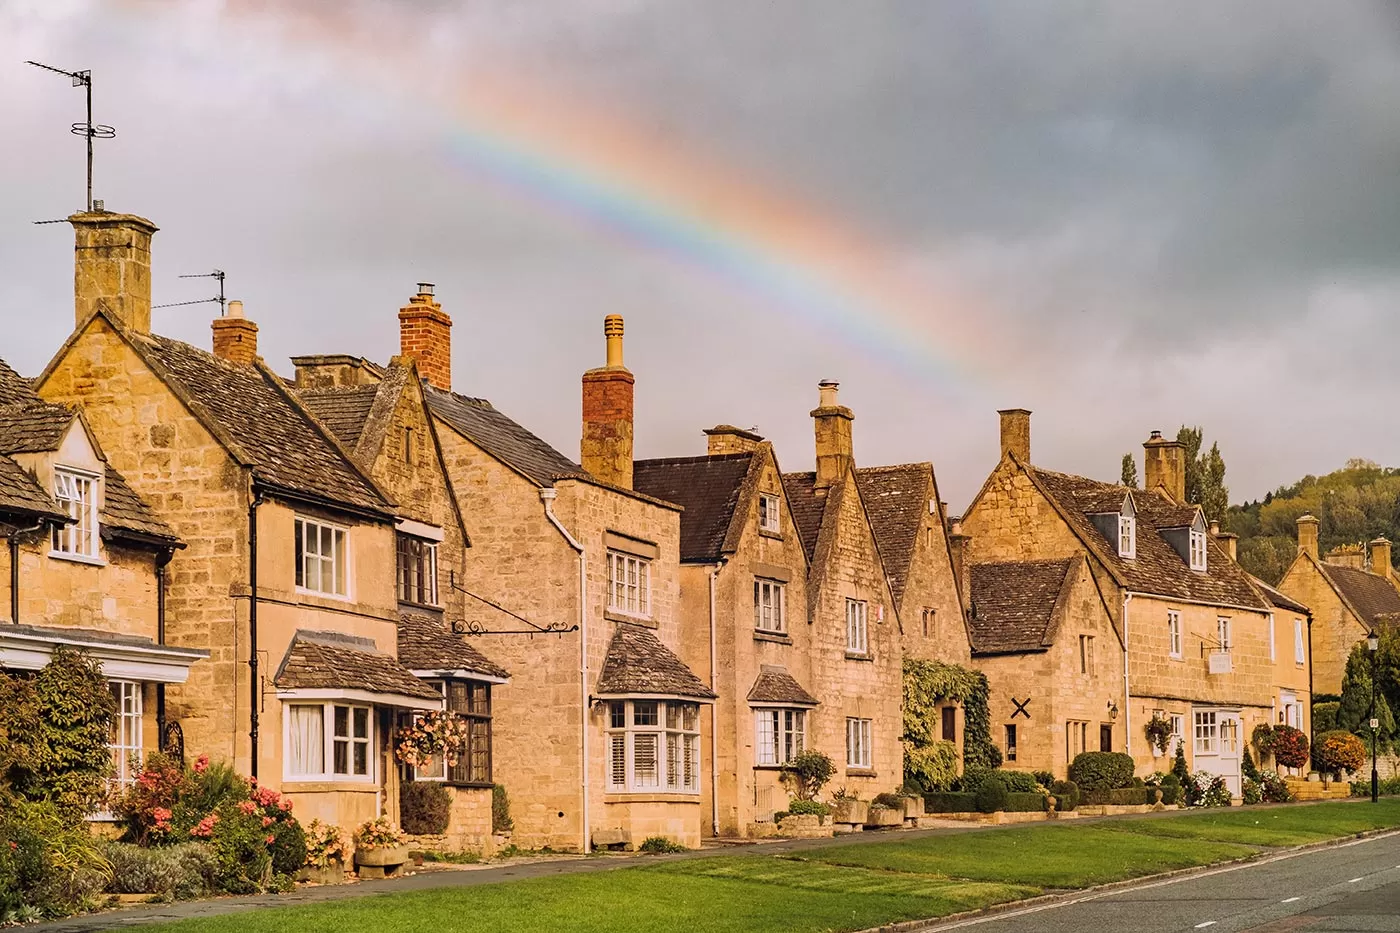 Cotswolds Best Villages - Broadway - Rainbows over pretty Jacobean homes on Upper High Street